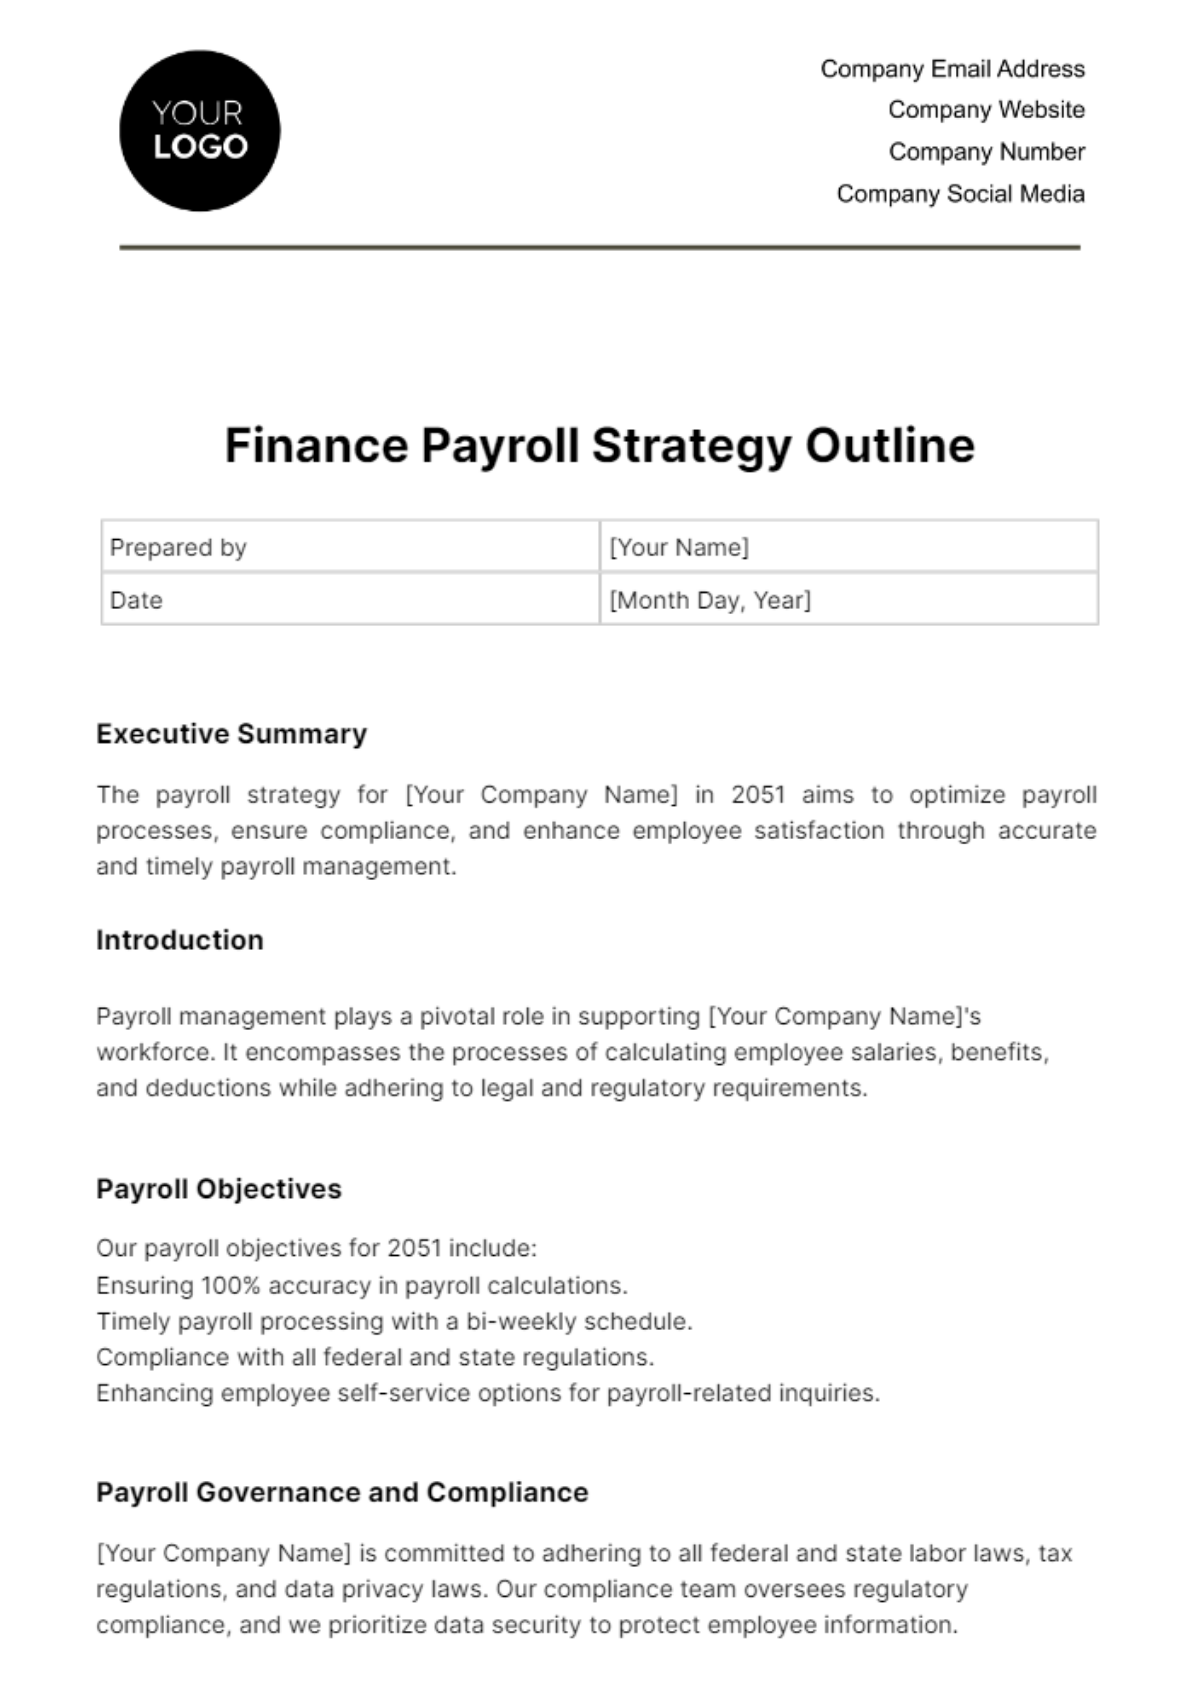 Free Finance Payroll Strategy Outline Template